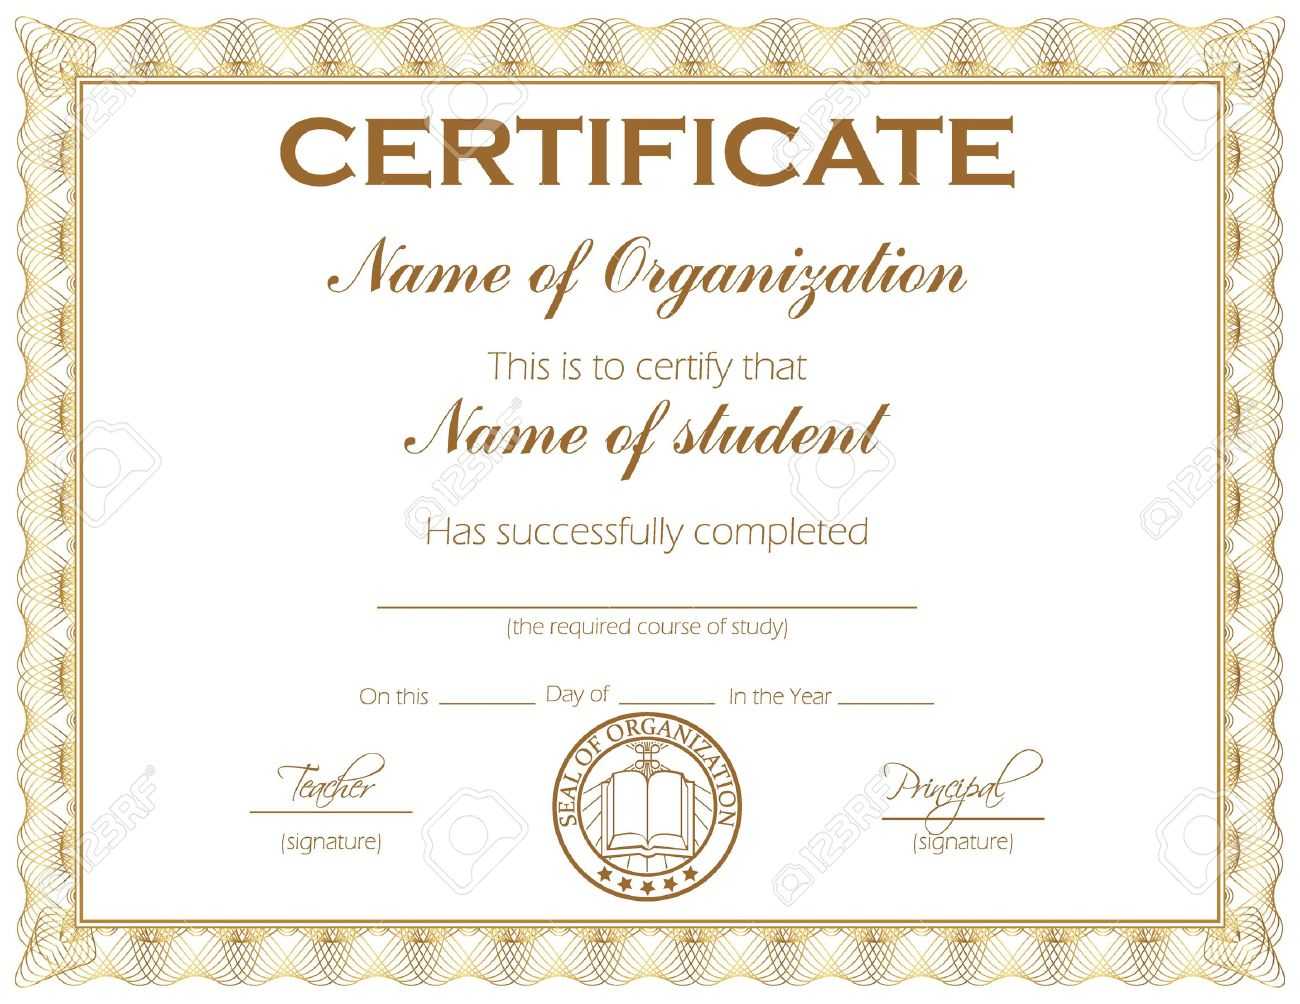 General Purpose Certificate Or Award With Sample Text That Can.. With Promotion Certificate Template